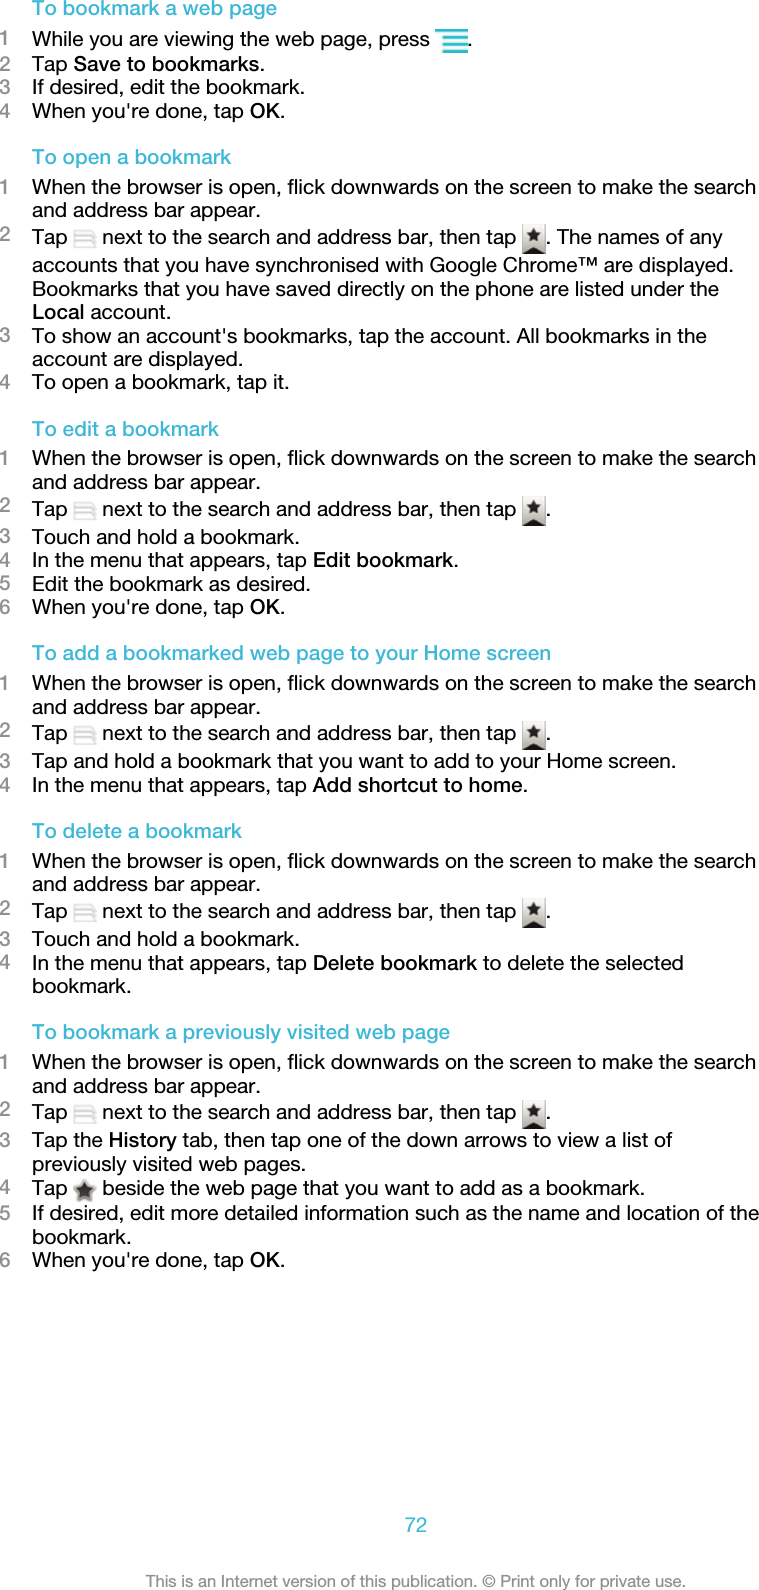 To bookmark a web page1While you are viewing the web page, press  .2Tap Save to bookmarks.3If desired, edit the bookmark.4When you&apos;re done, tap OK.To open a bookmark1When the browser is open, flick downwards on the screen to make the searchand address bar appear.2Tap   next to the search and address bar, then tap  . The names of anyaccounts that you have synchronised with Google Chrome™ are displayed.Bookmarks that you have saved directly on the phone are listed under theLocal account.3To show an account&apos;s bookmarks, tap the account. All bookmarks in theaccount are displayed.4To open a bookmark, tap it.To edit a bookmark1When the browser is open, flick downwards on the screen to make the searchand address bar appear.2Tap   next to the search and address bar, then tap  .3Touch and hold a bookmark.4In the menu that appears, tap Edit bookmark.5Edit the bookmark as desired.6When you&apos;re done, tap OK.To add a bookmarked web page to your Home screen1When the browser is open, flick downwards on the screen to make the searchand address bar appear.2Tap   next to the search and address bar, then tap  .3Tap and hold a bookmark that you want to add to your Home screen.4In the menu that appears, tap Add shortcut to home.To delete a bookmark1When the browser is open, flick downwards on the screen to make the searchand address bar appear.2Tap   next to the search and address bar, then tap  .3Touch and hold a bookmark.4In the menu that appears, tap Delete bookmark to delete the selectedbookmark.To bookmark a previously visited web page1When the browser is open, flick downwards on the screen to make the searchand address bar appear.2Tap   next to the search and address bar, then tap  .3Tap the History tab, then tap one of the down arrows to view a list ofpreviously visited web pages.4Tap   beside the web page that you want to add as a bookmark.5If desired, edit more detailed information such as the name and location of thebookmark.6When you&apos;re done, tap OK.72This is an Internet version of this publication. © Print only for private use.